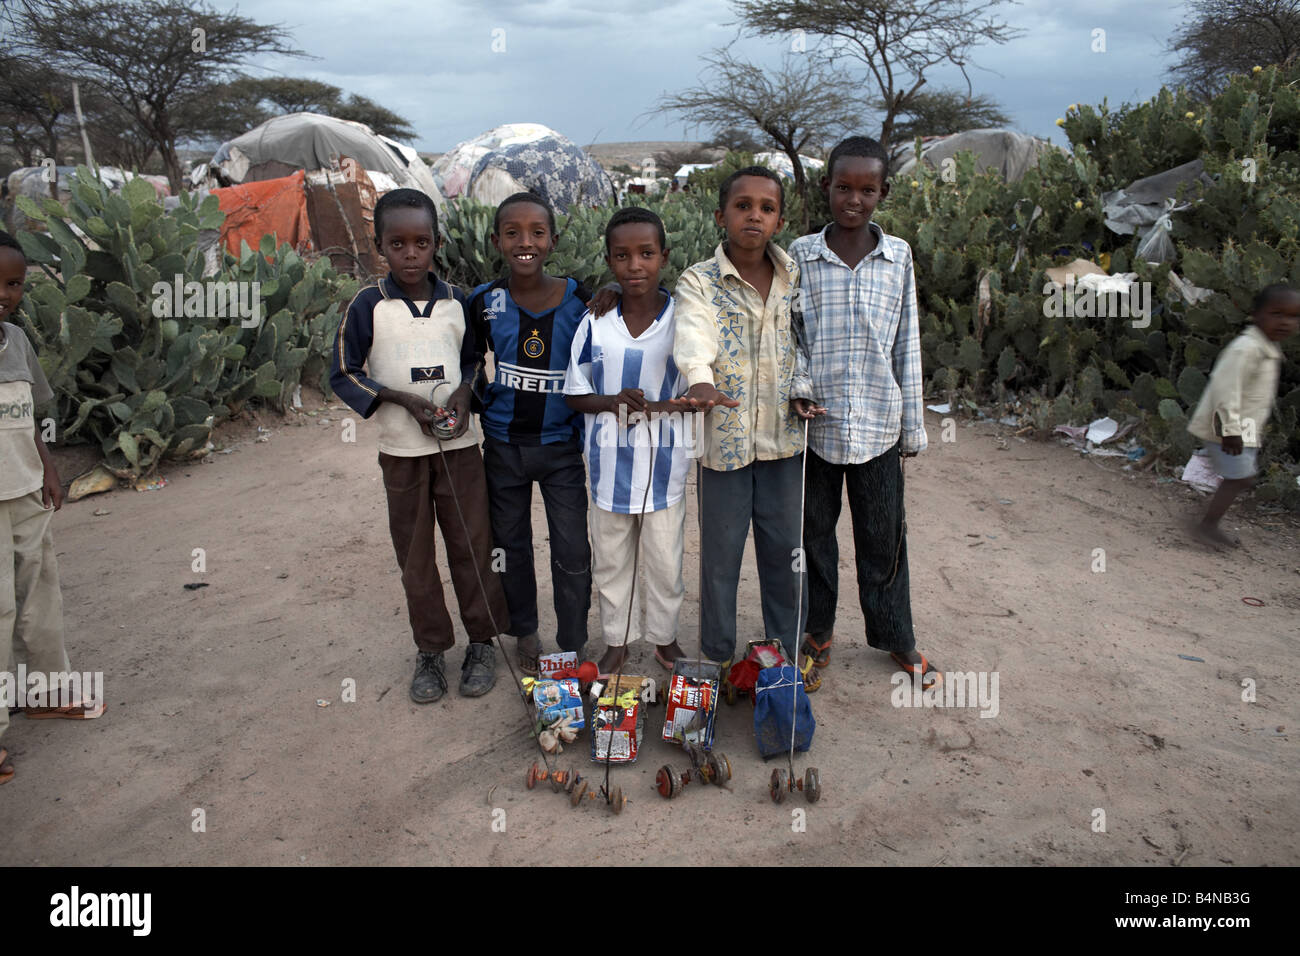 Children with homemade toys at an Internally Displaced Persons camp, Hargeisa, Somaliland, Somalia Stock Photo